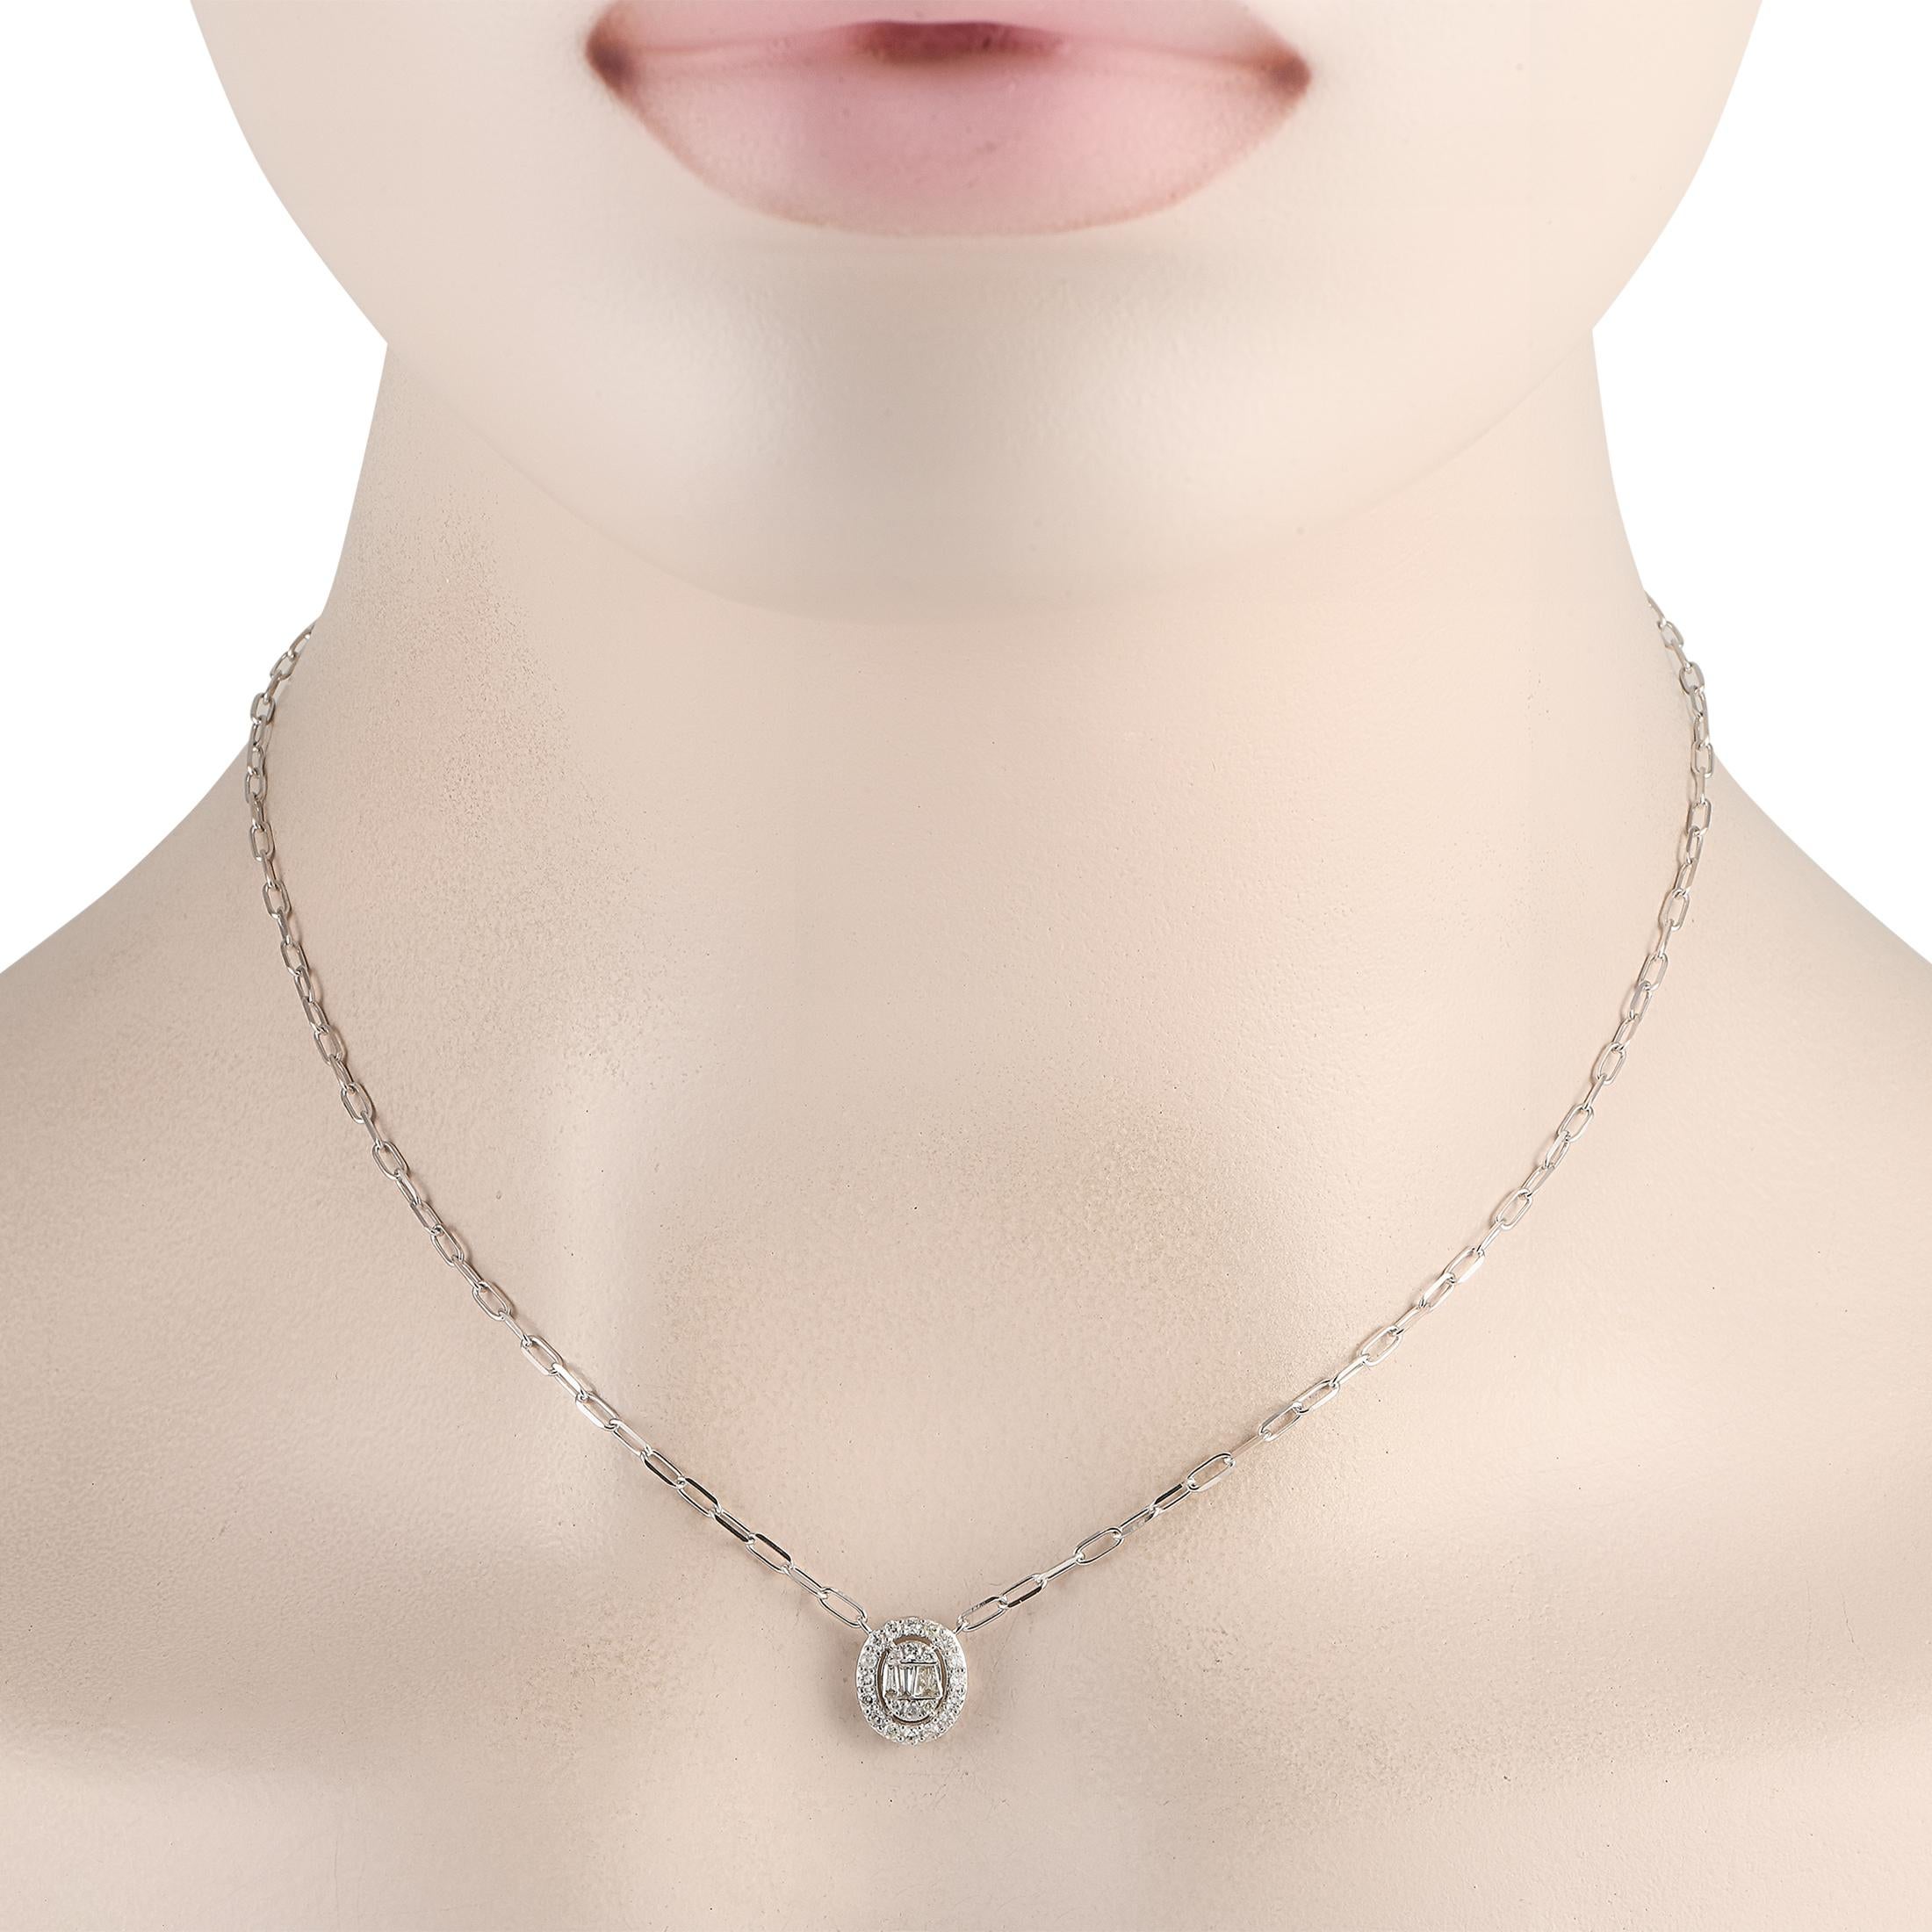 Simple, elegant, and perfectly understated, this 14K white gold necklace will add the perfect finishing touch to absolutely any ensemble. Suspended from a chic 16 paperclip chain, an oval-shaped pendant measuring 0.45 long by 0.40 wide comes to life